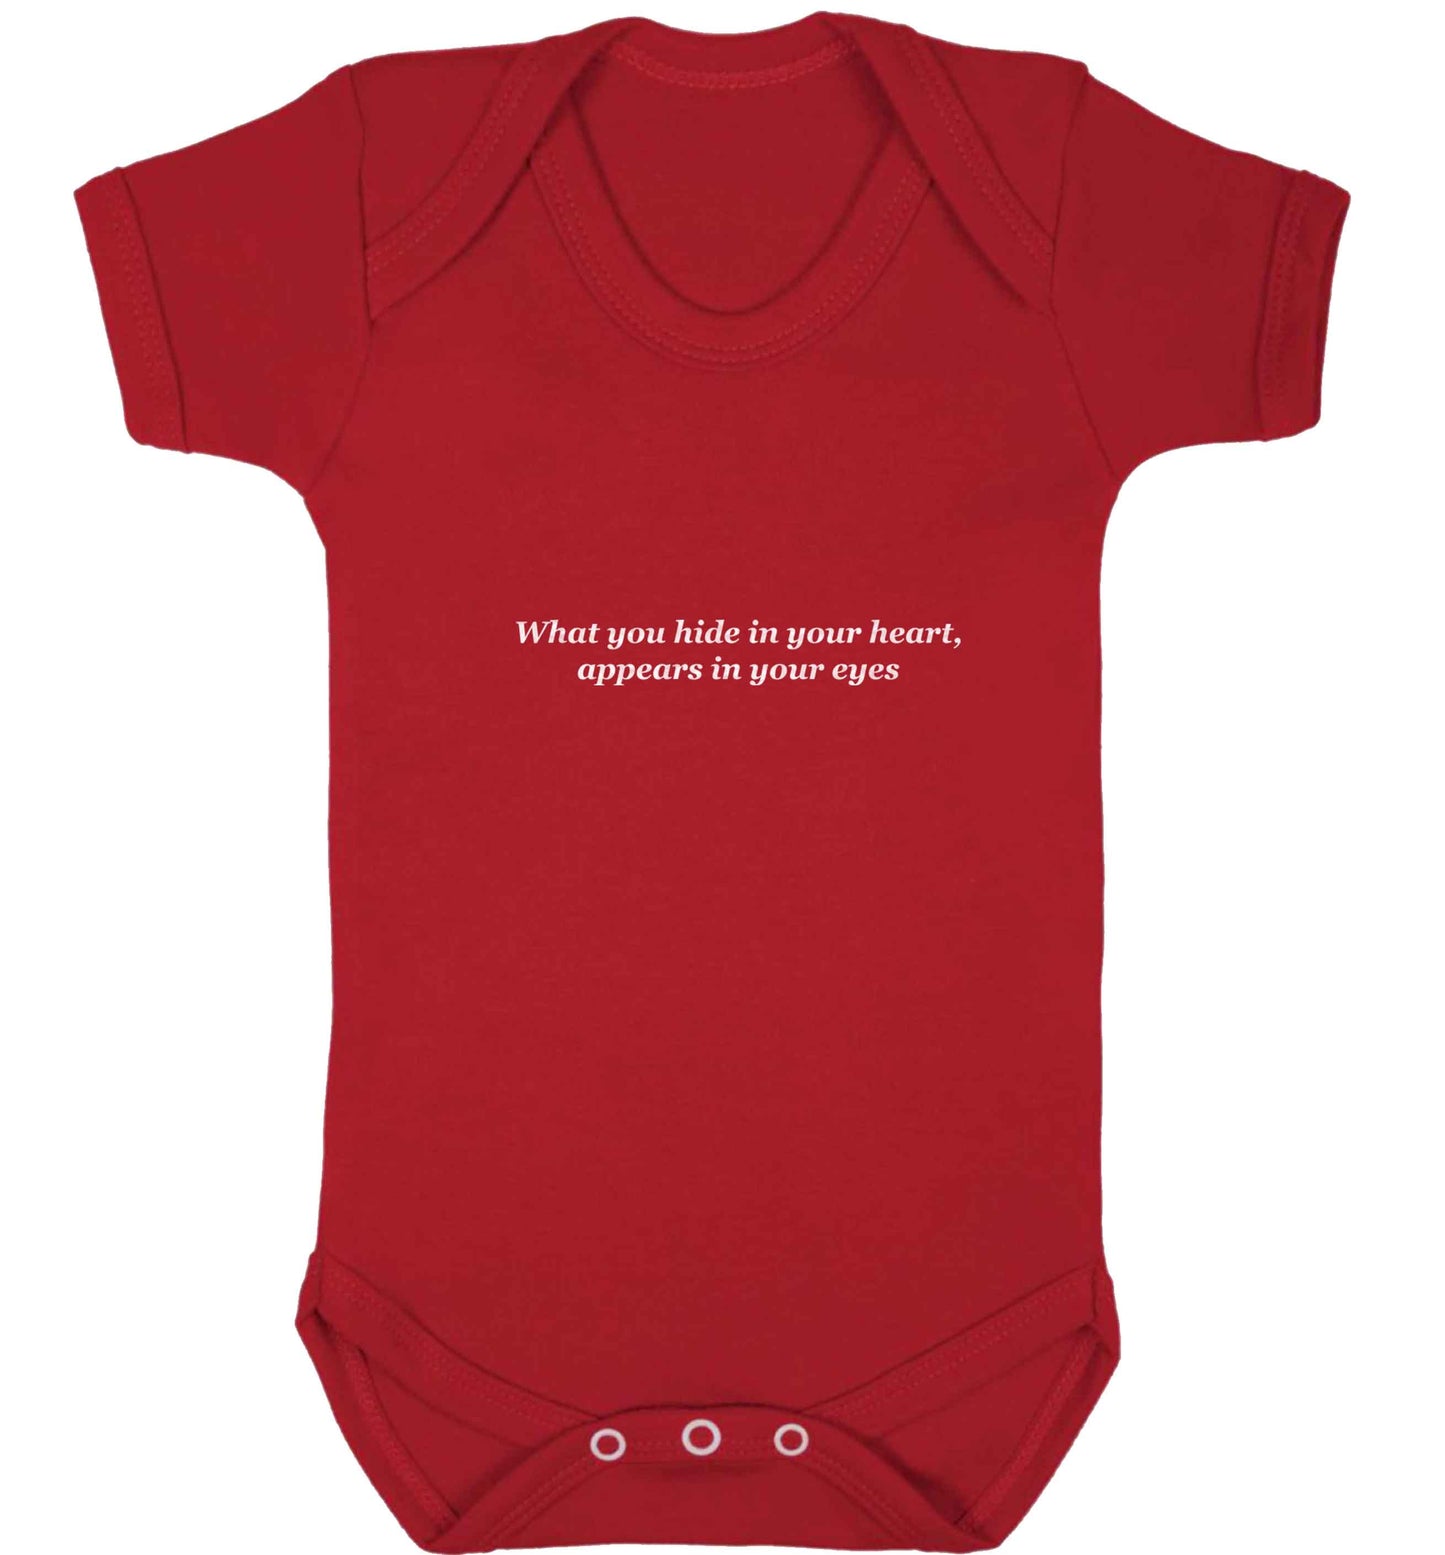 What you hide in your heart, appears in your eyes baby vest red 18-24 months